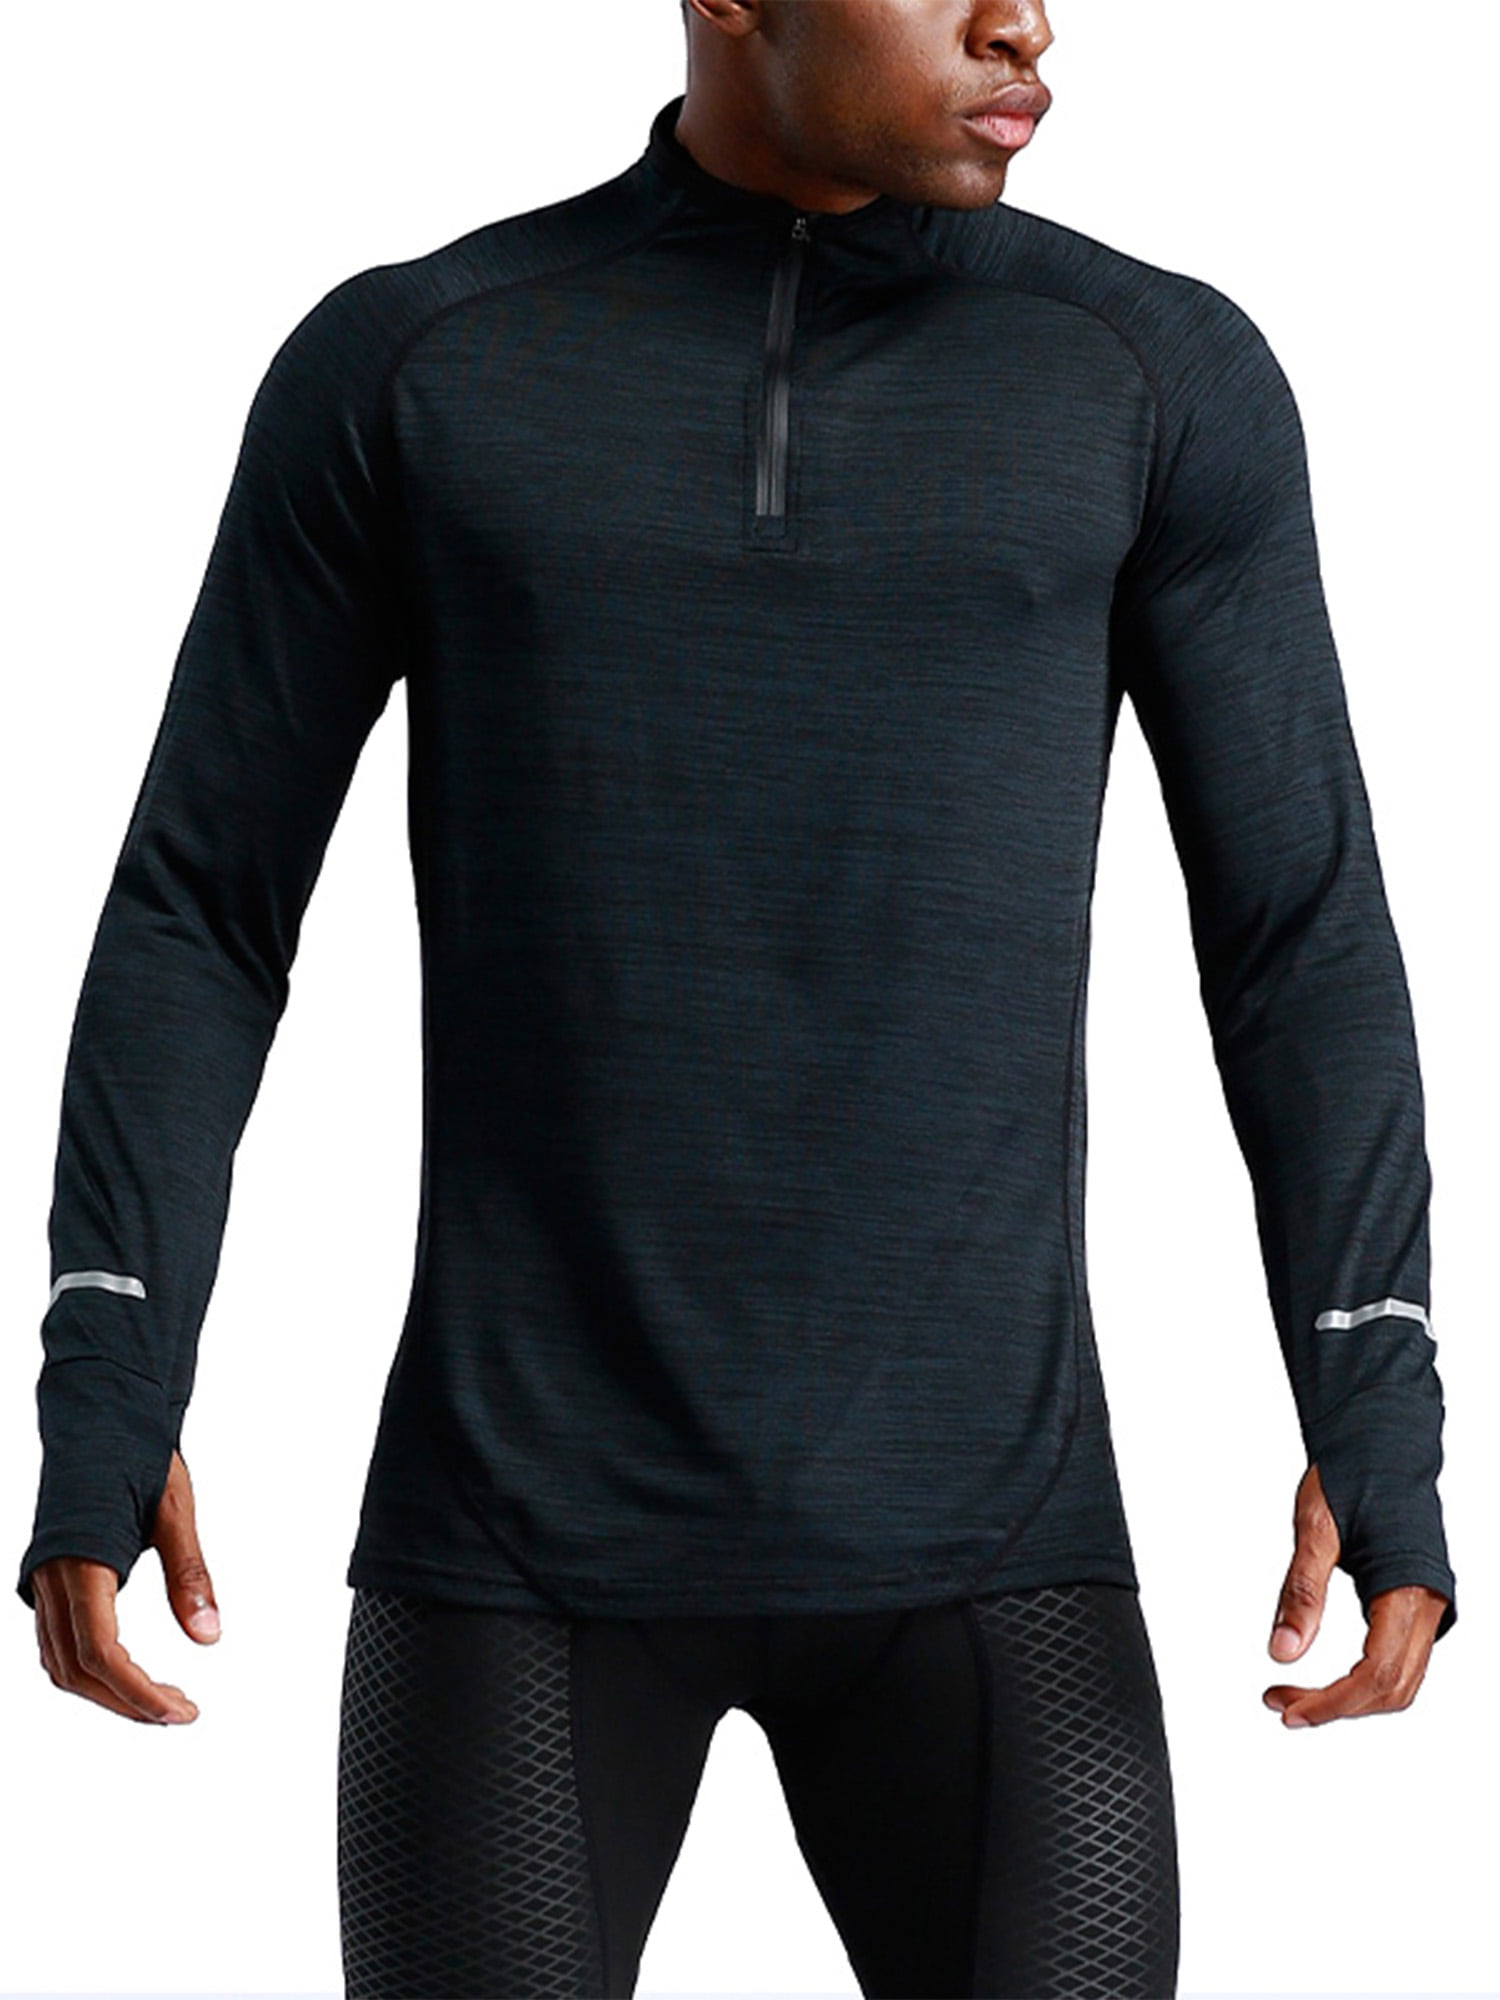 Details about   Erima Mens Kids Sports Training Running Workout Thumb Hole Long Sleeve Top Black